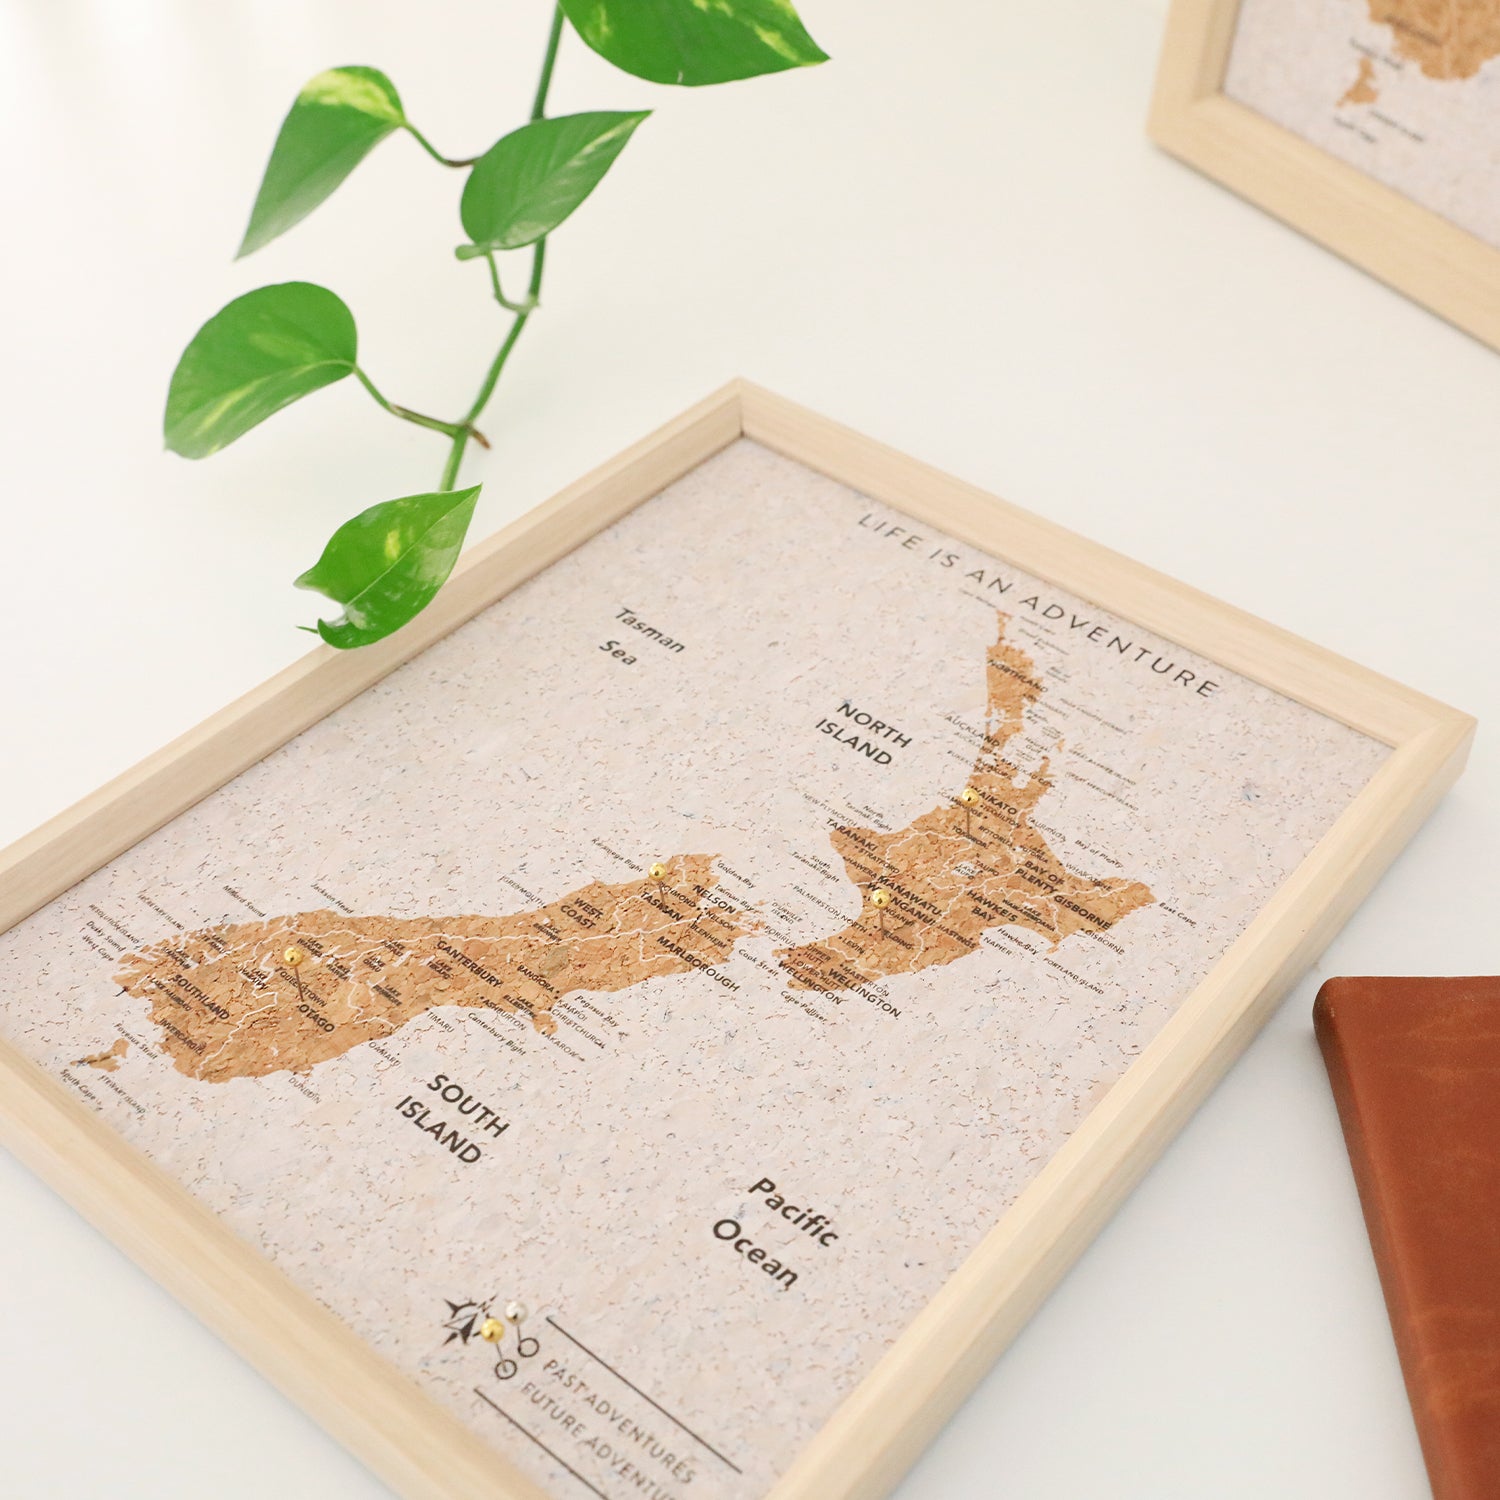 Travel Board New Zealand Map Small